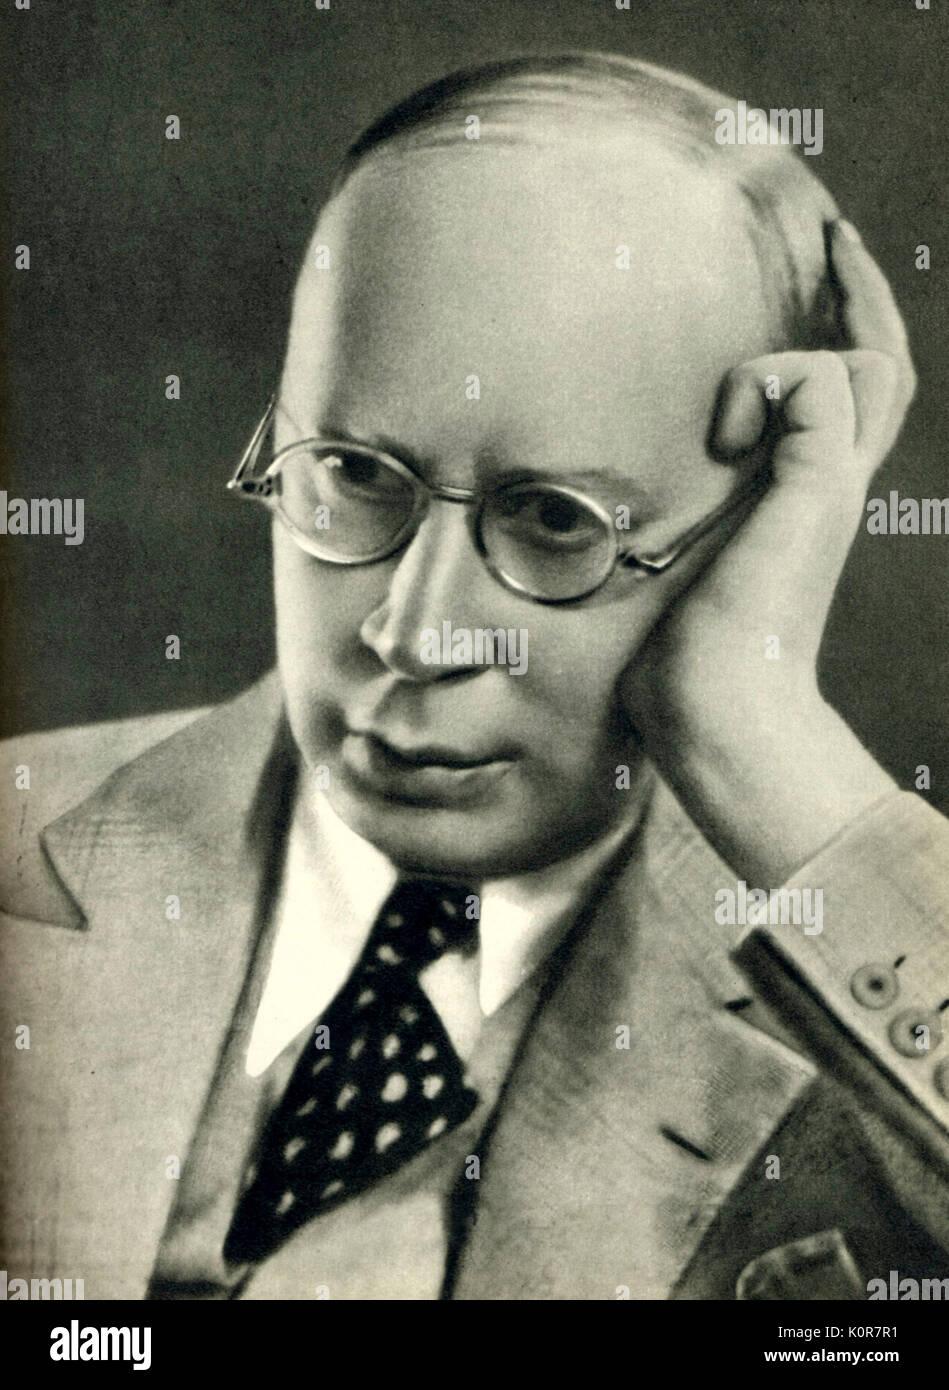 Sergey PROKOFIEV in late 1930s. Russian composer (1891-1953). Stock Photo